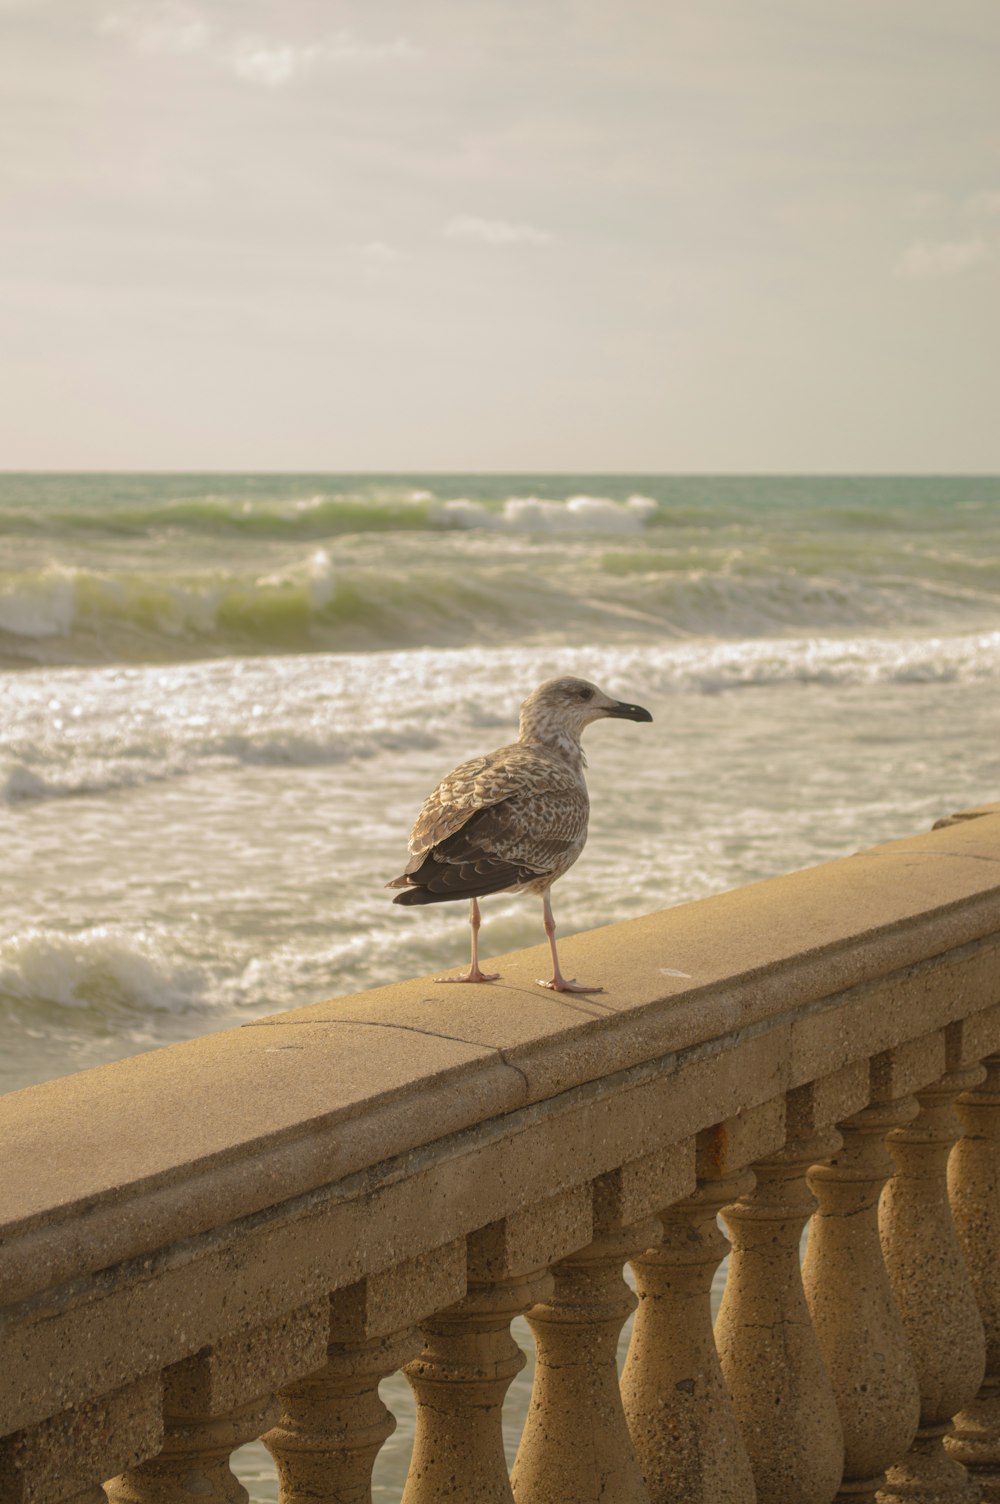 a seagull is standing on a railing near the ocean